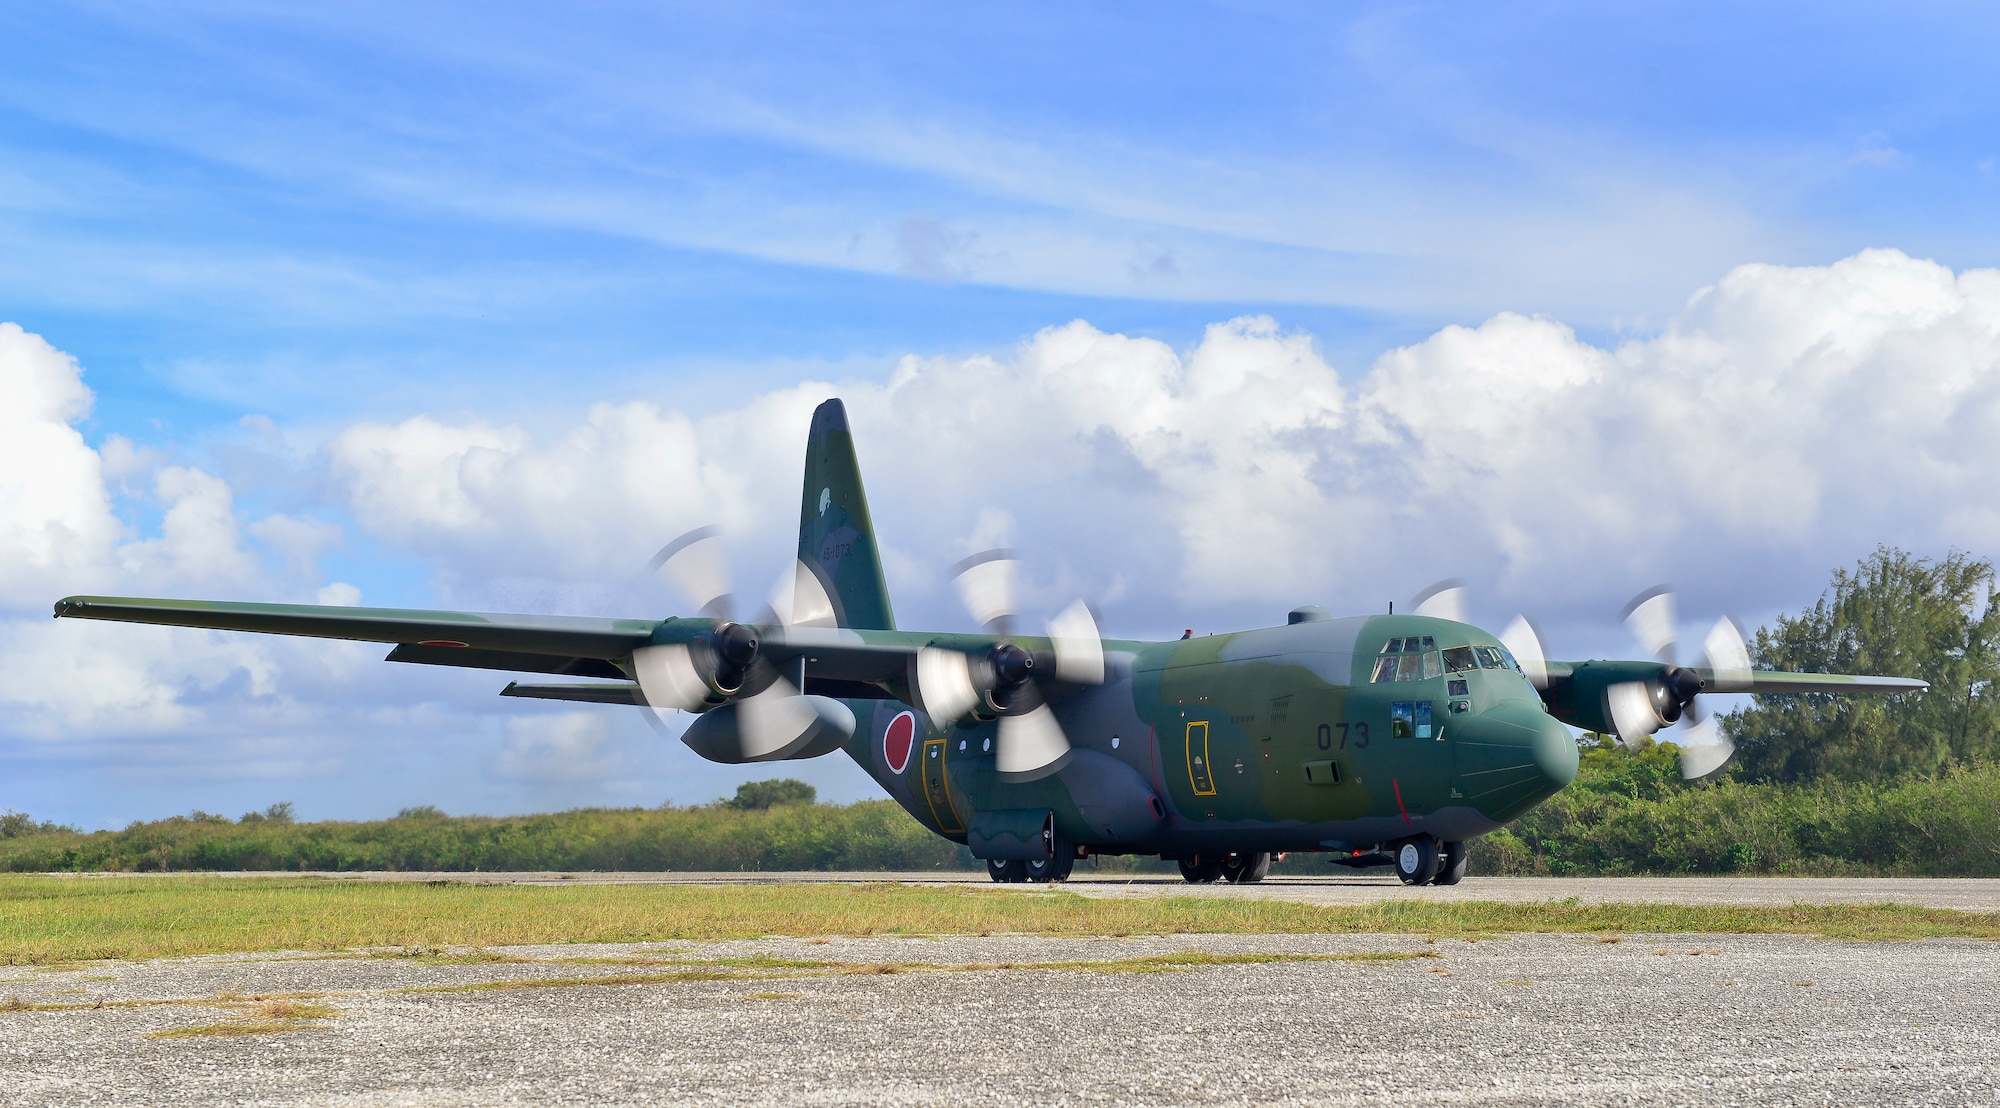 A Koku Jieitai (Japanese Air Self-Defense Force) C-130H Hercules lands on Tinian, U.S. Commonwealth of the Northern Marianas Islands, during exercise COPE NORTH 18, Feb. 21. Through exercises and engagements during COPE NORTH, United States Air Force, Koku Jieitai (Japan Air Self-Defense Force) and Royal Australian Air Force increase interoperability for humanitarian assistance/disaster relief operations. (U.S. Air Force photo by Airman 1st Class Christopher Quail)